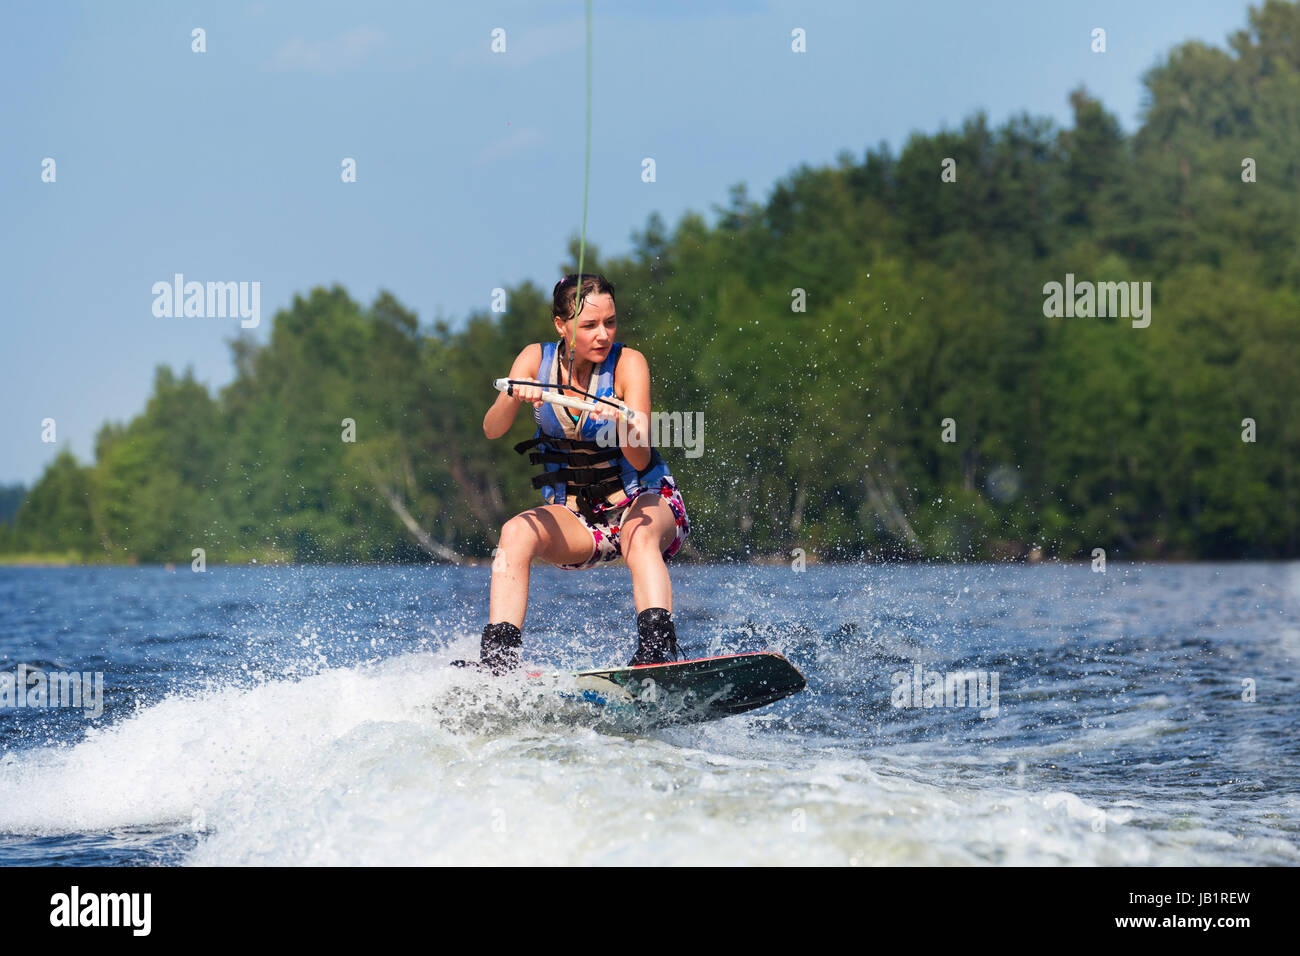 Young pretty slim brunette woman riding wakeboard on wave of motorboat in a summer lake Stock Photo